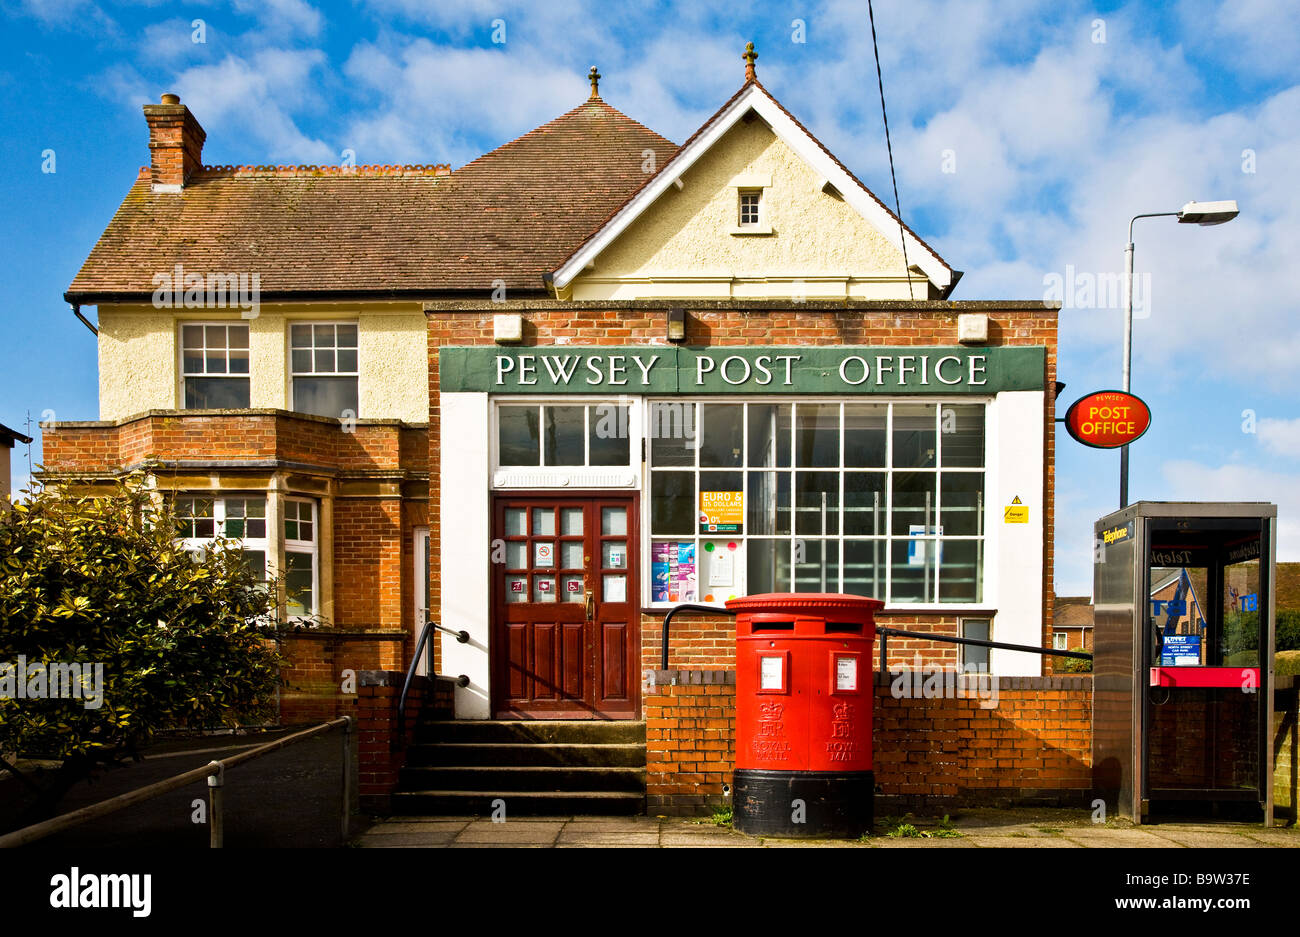 Village post office in Pewsey, Wiltshire, England, UK Stock Photo